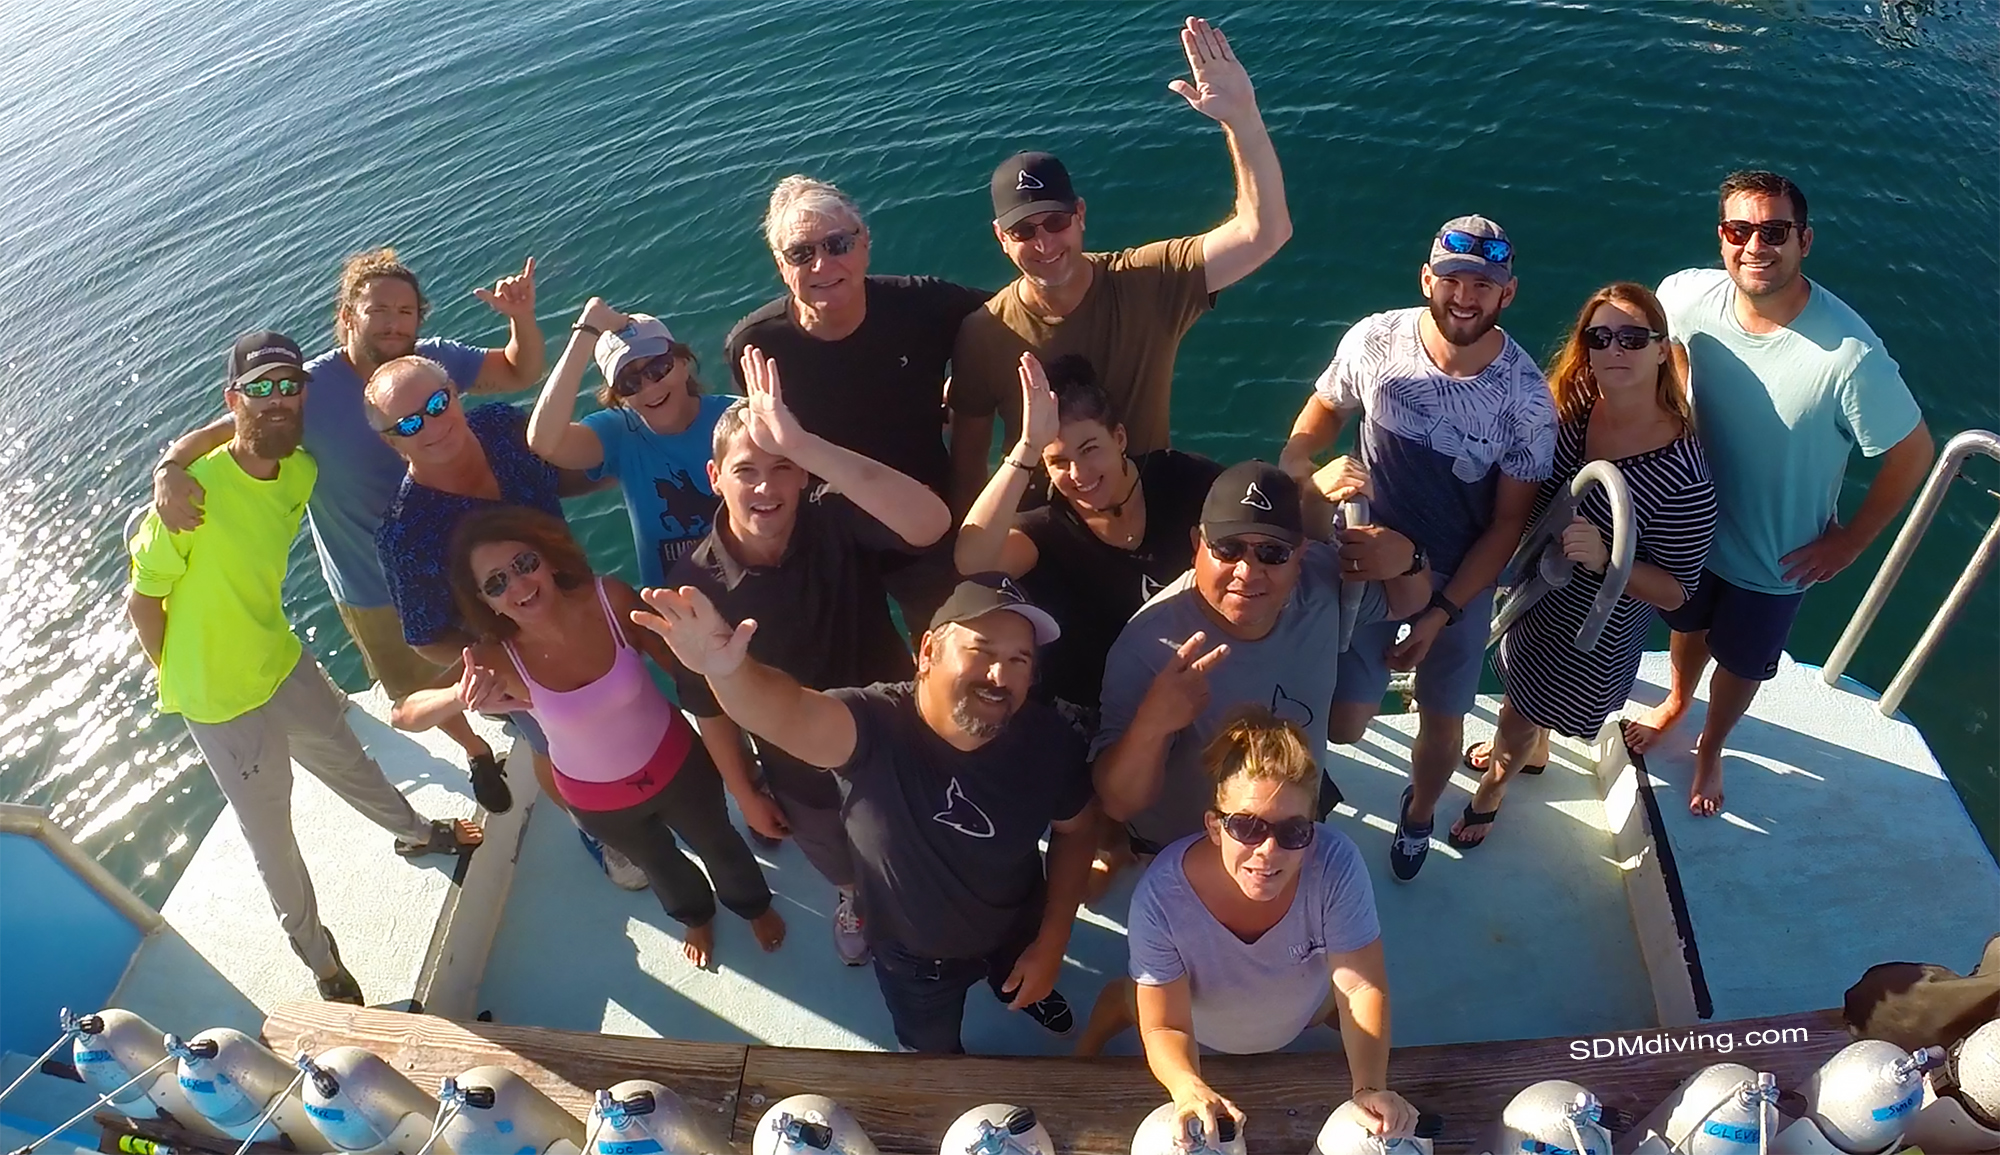 October Tiger Shark Expedition Group Pic.jpg